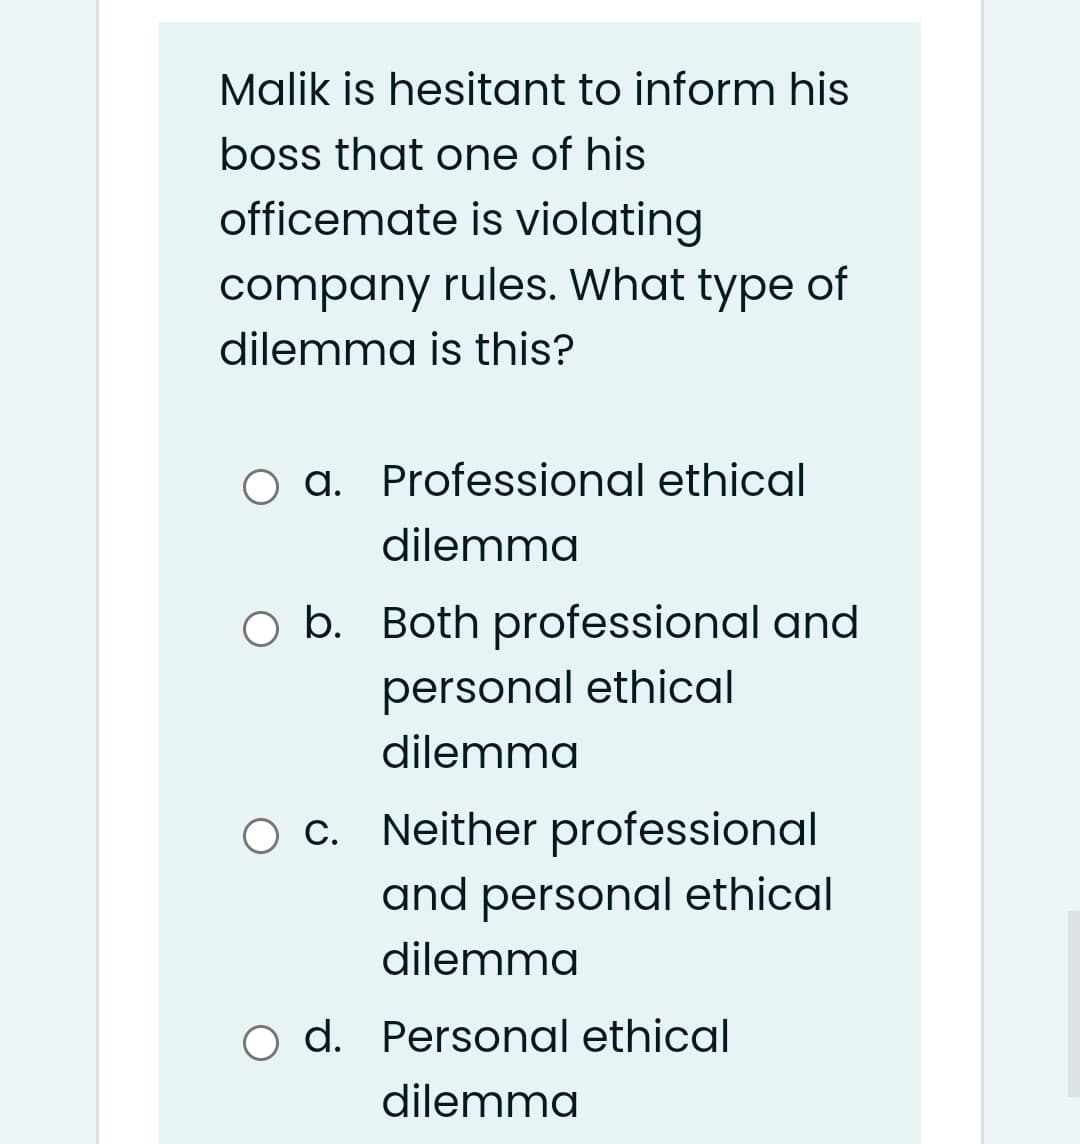 Malik is hesitant to inform his
boss that one of his
officemate is violating
company rules. What type of
dilemma is this?
a. Professional ethical
dilemma
O b. Both professional and
personal ethical
dilemma
O c. Neither professional
and personal ethical
dilemma
o d. Personal ethical
dilemma
